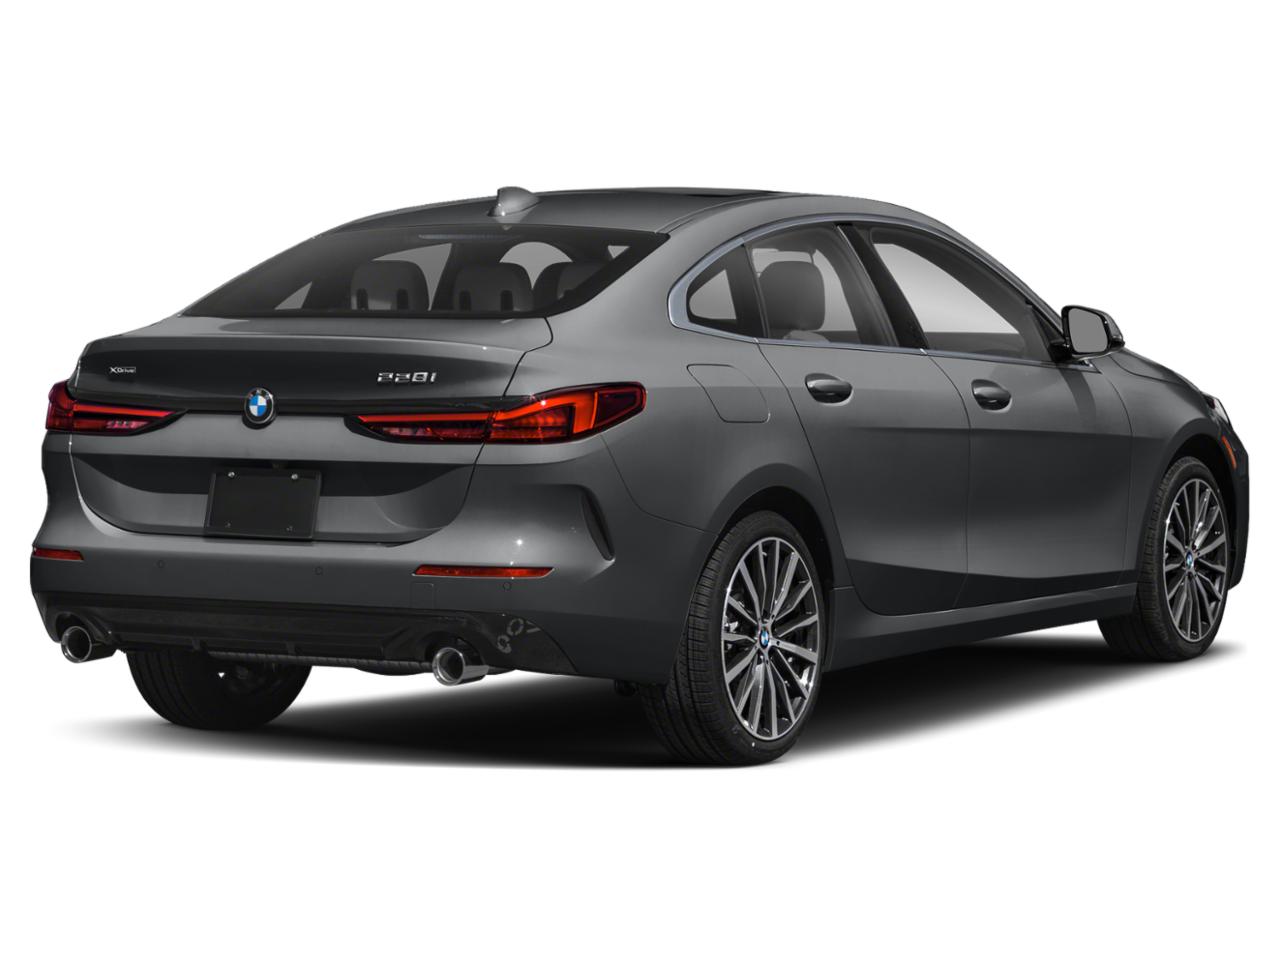 New 2021 BMW 228i xDrive Mineral Gray Metallic Gran Coupe (With Photos